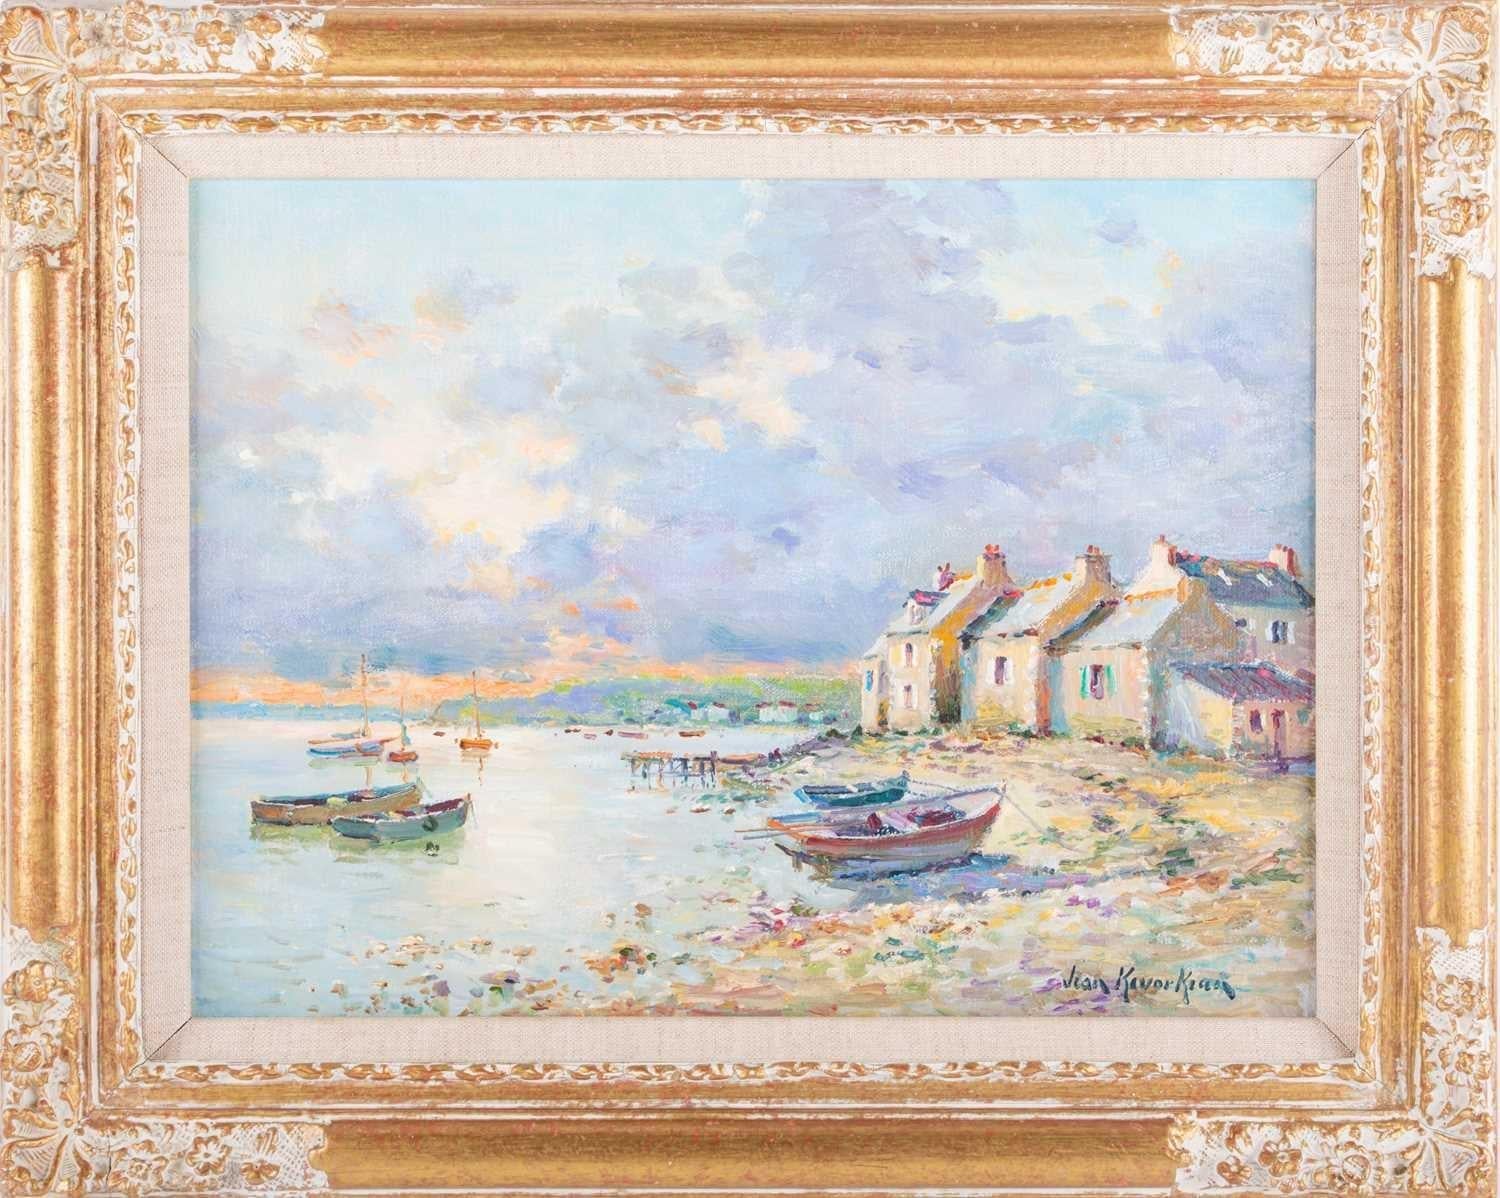 Superb French Impressionist Signed Oil Painting Brittany Boats Coastline Sunset